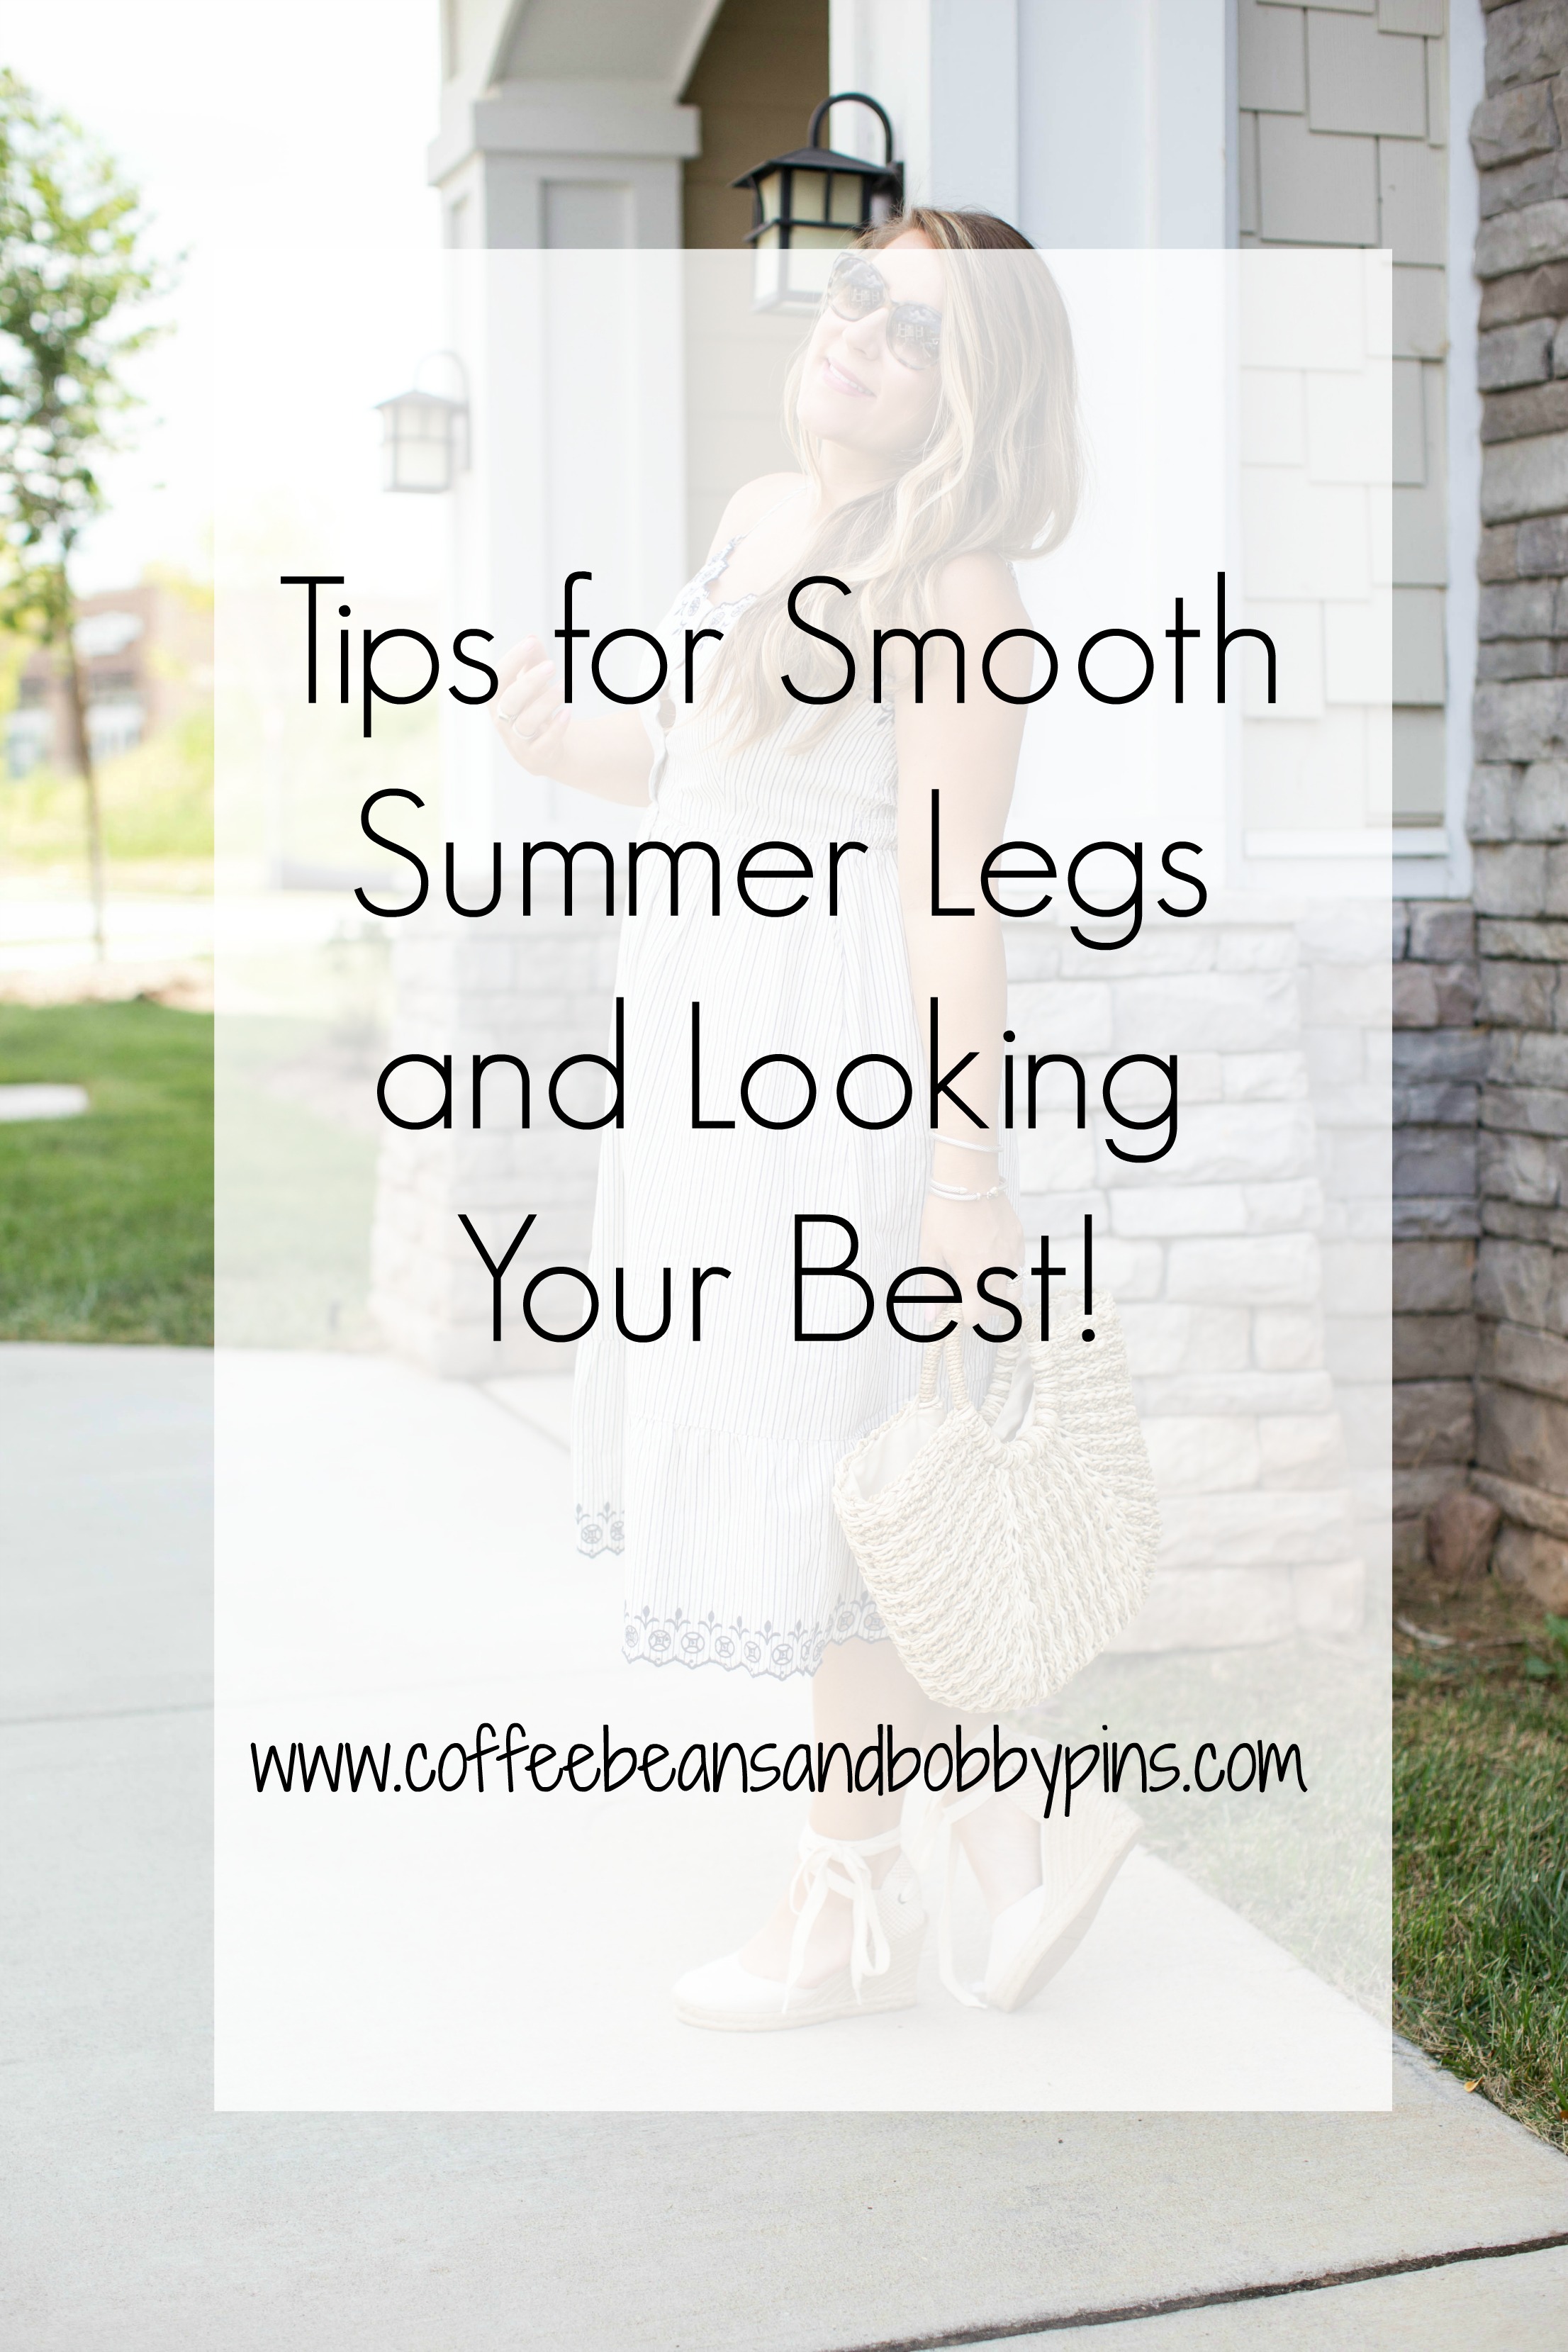 The Best Tips for Smooth Summer Legs and Looking Your Best! by popular NC blogger Coffee Beans and Bobby Pins